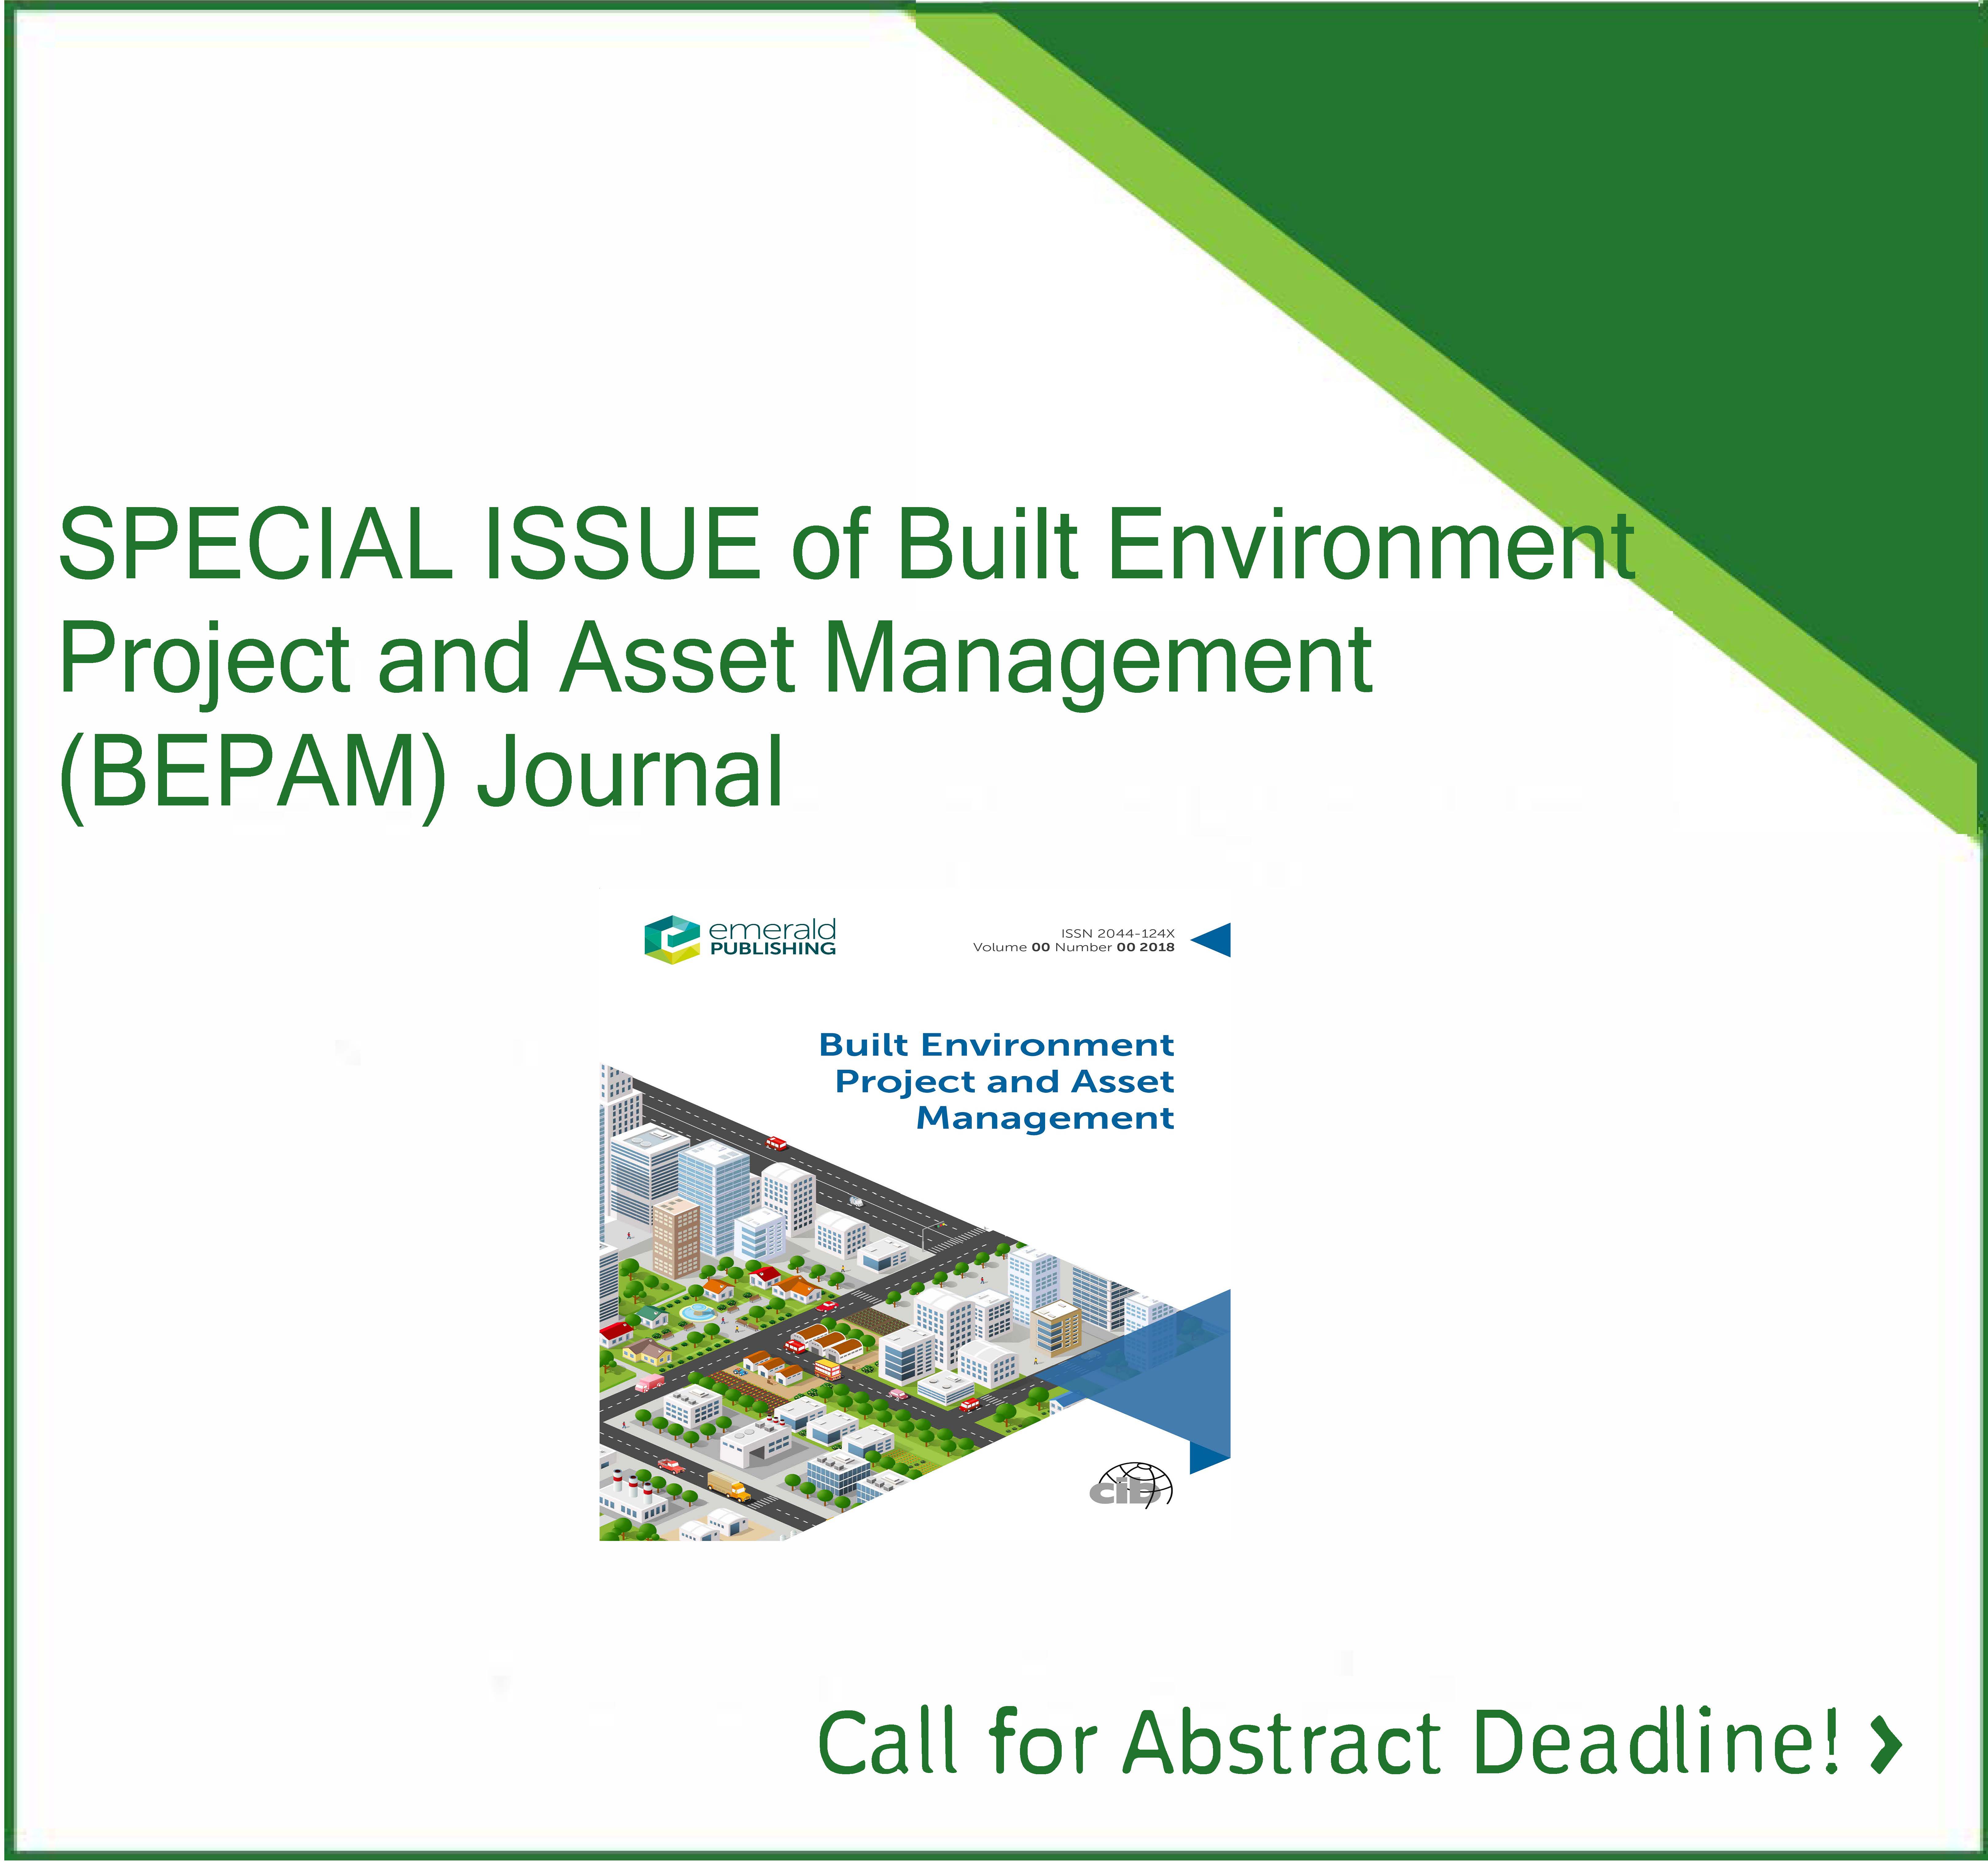 SPECIAL ISSUE of Built Environment Project and Asset Management (BEPAM) Journal: Deadline 15 Feb 2022